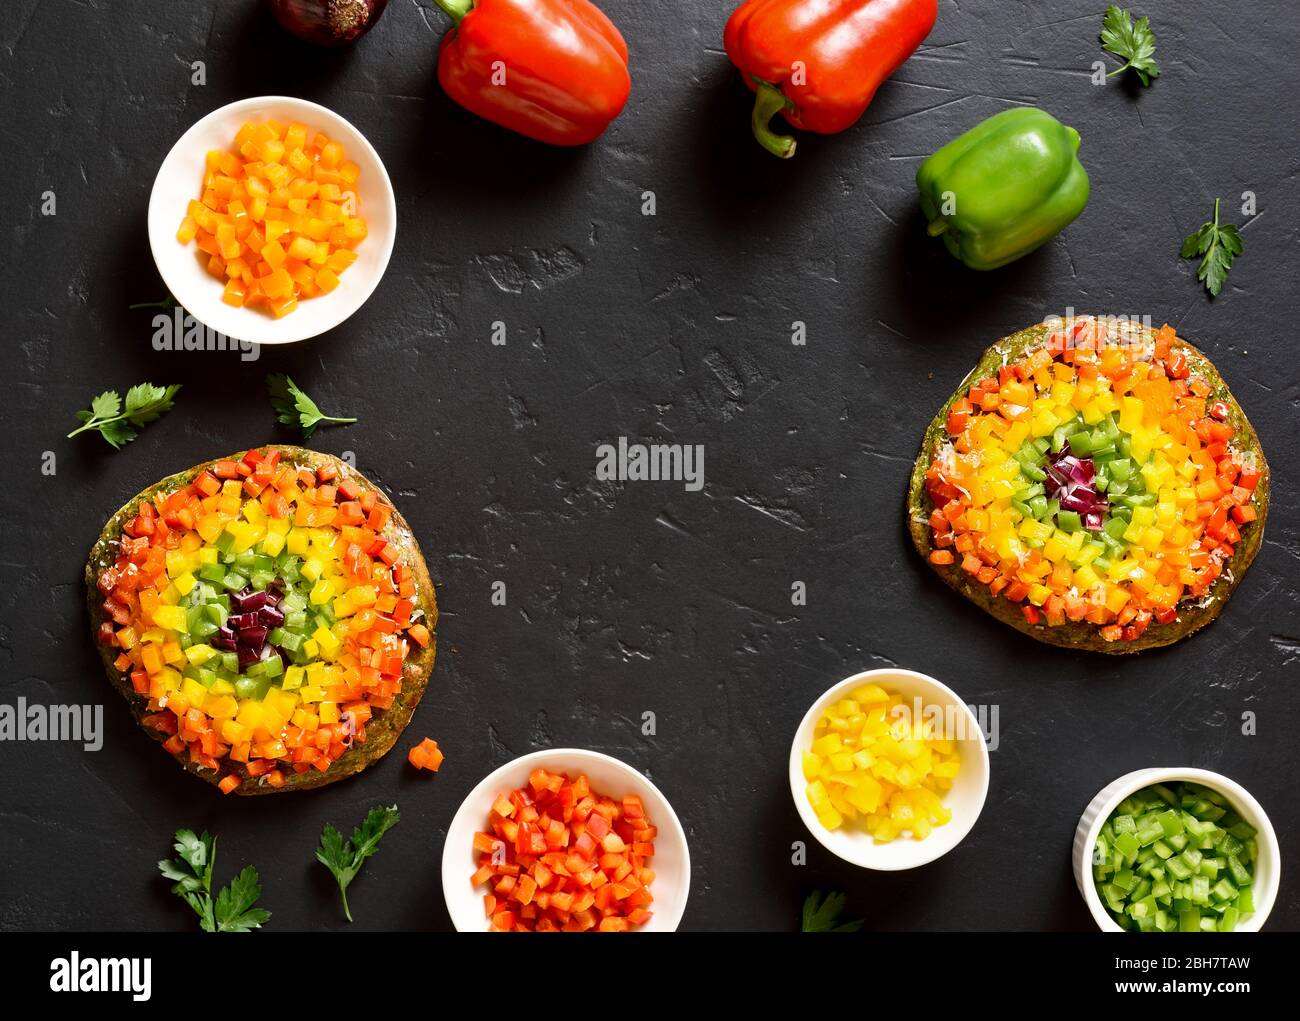 Frame of rainbow veggie bell peppers pizza and ingredients on black stone background. Vegetarian vegan or healthy food concept. Gluten free diet dish. Stock Photo